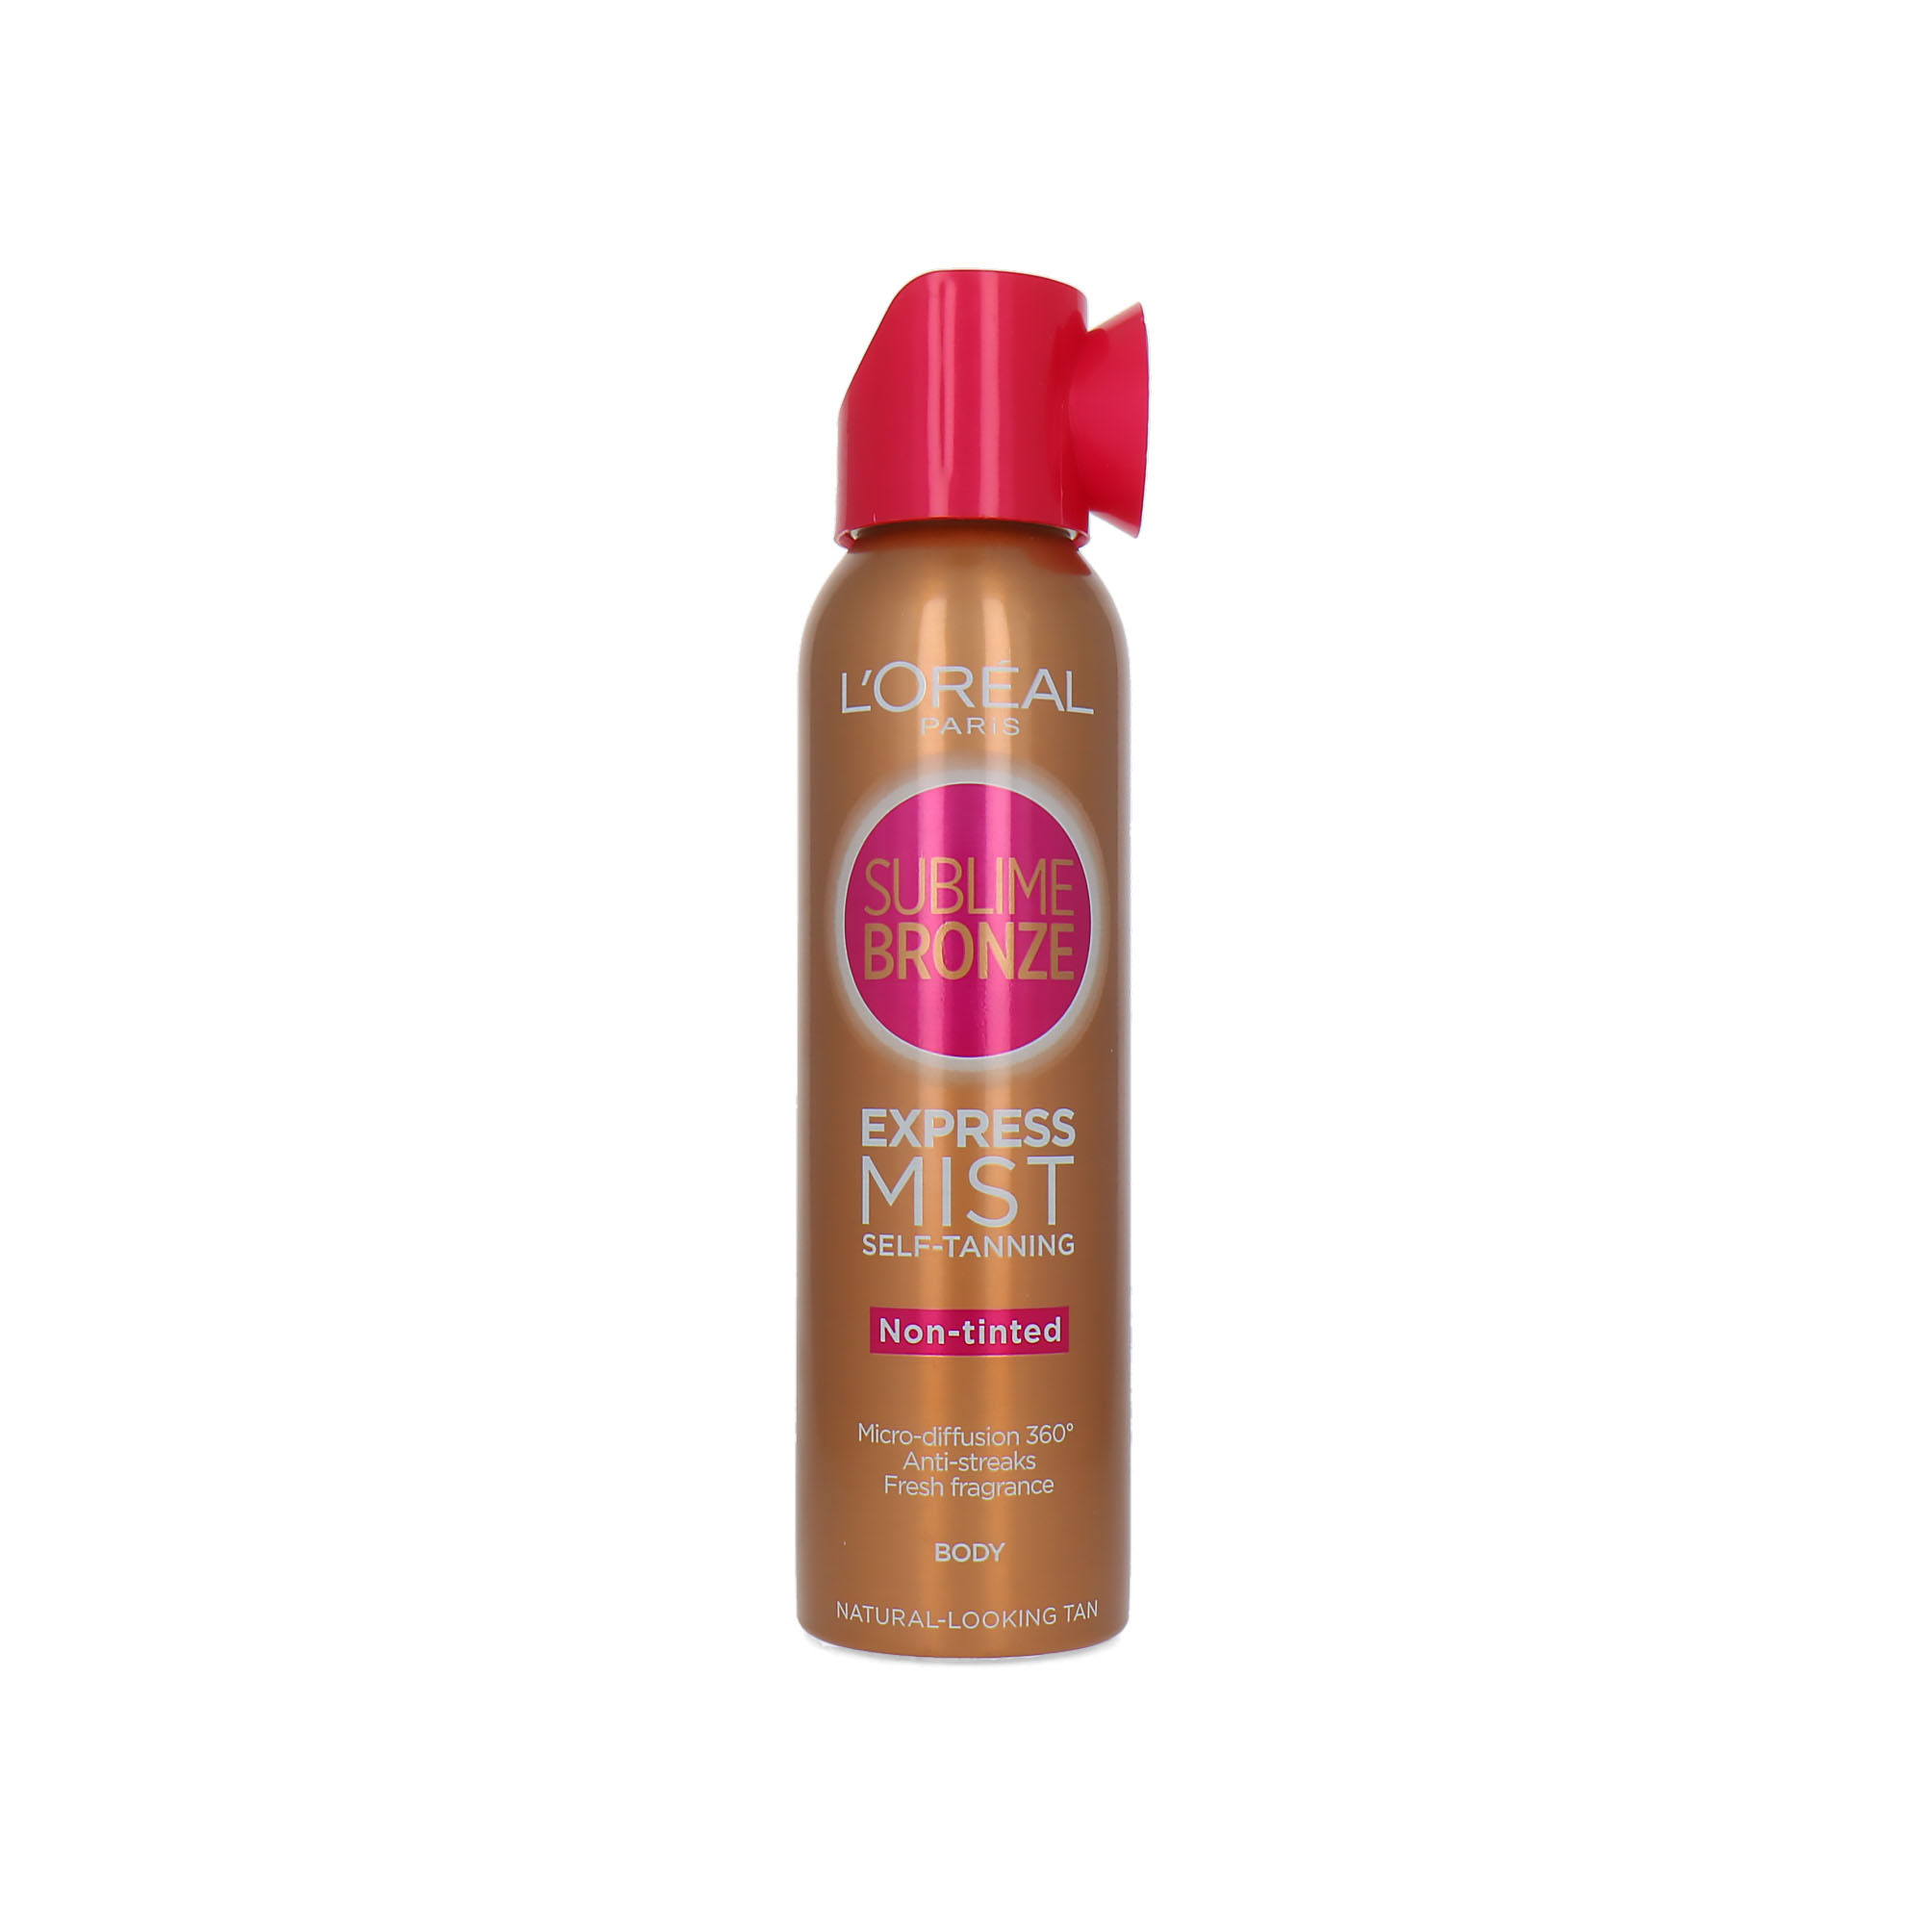 L'Oréal Sublime Bronze Express Mist Body Self-Tanning Non-Tinted - 150 ml